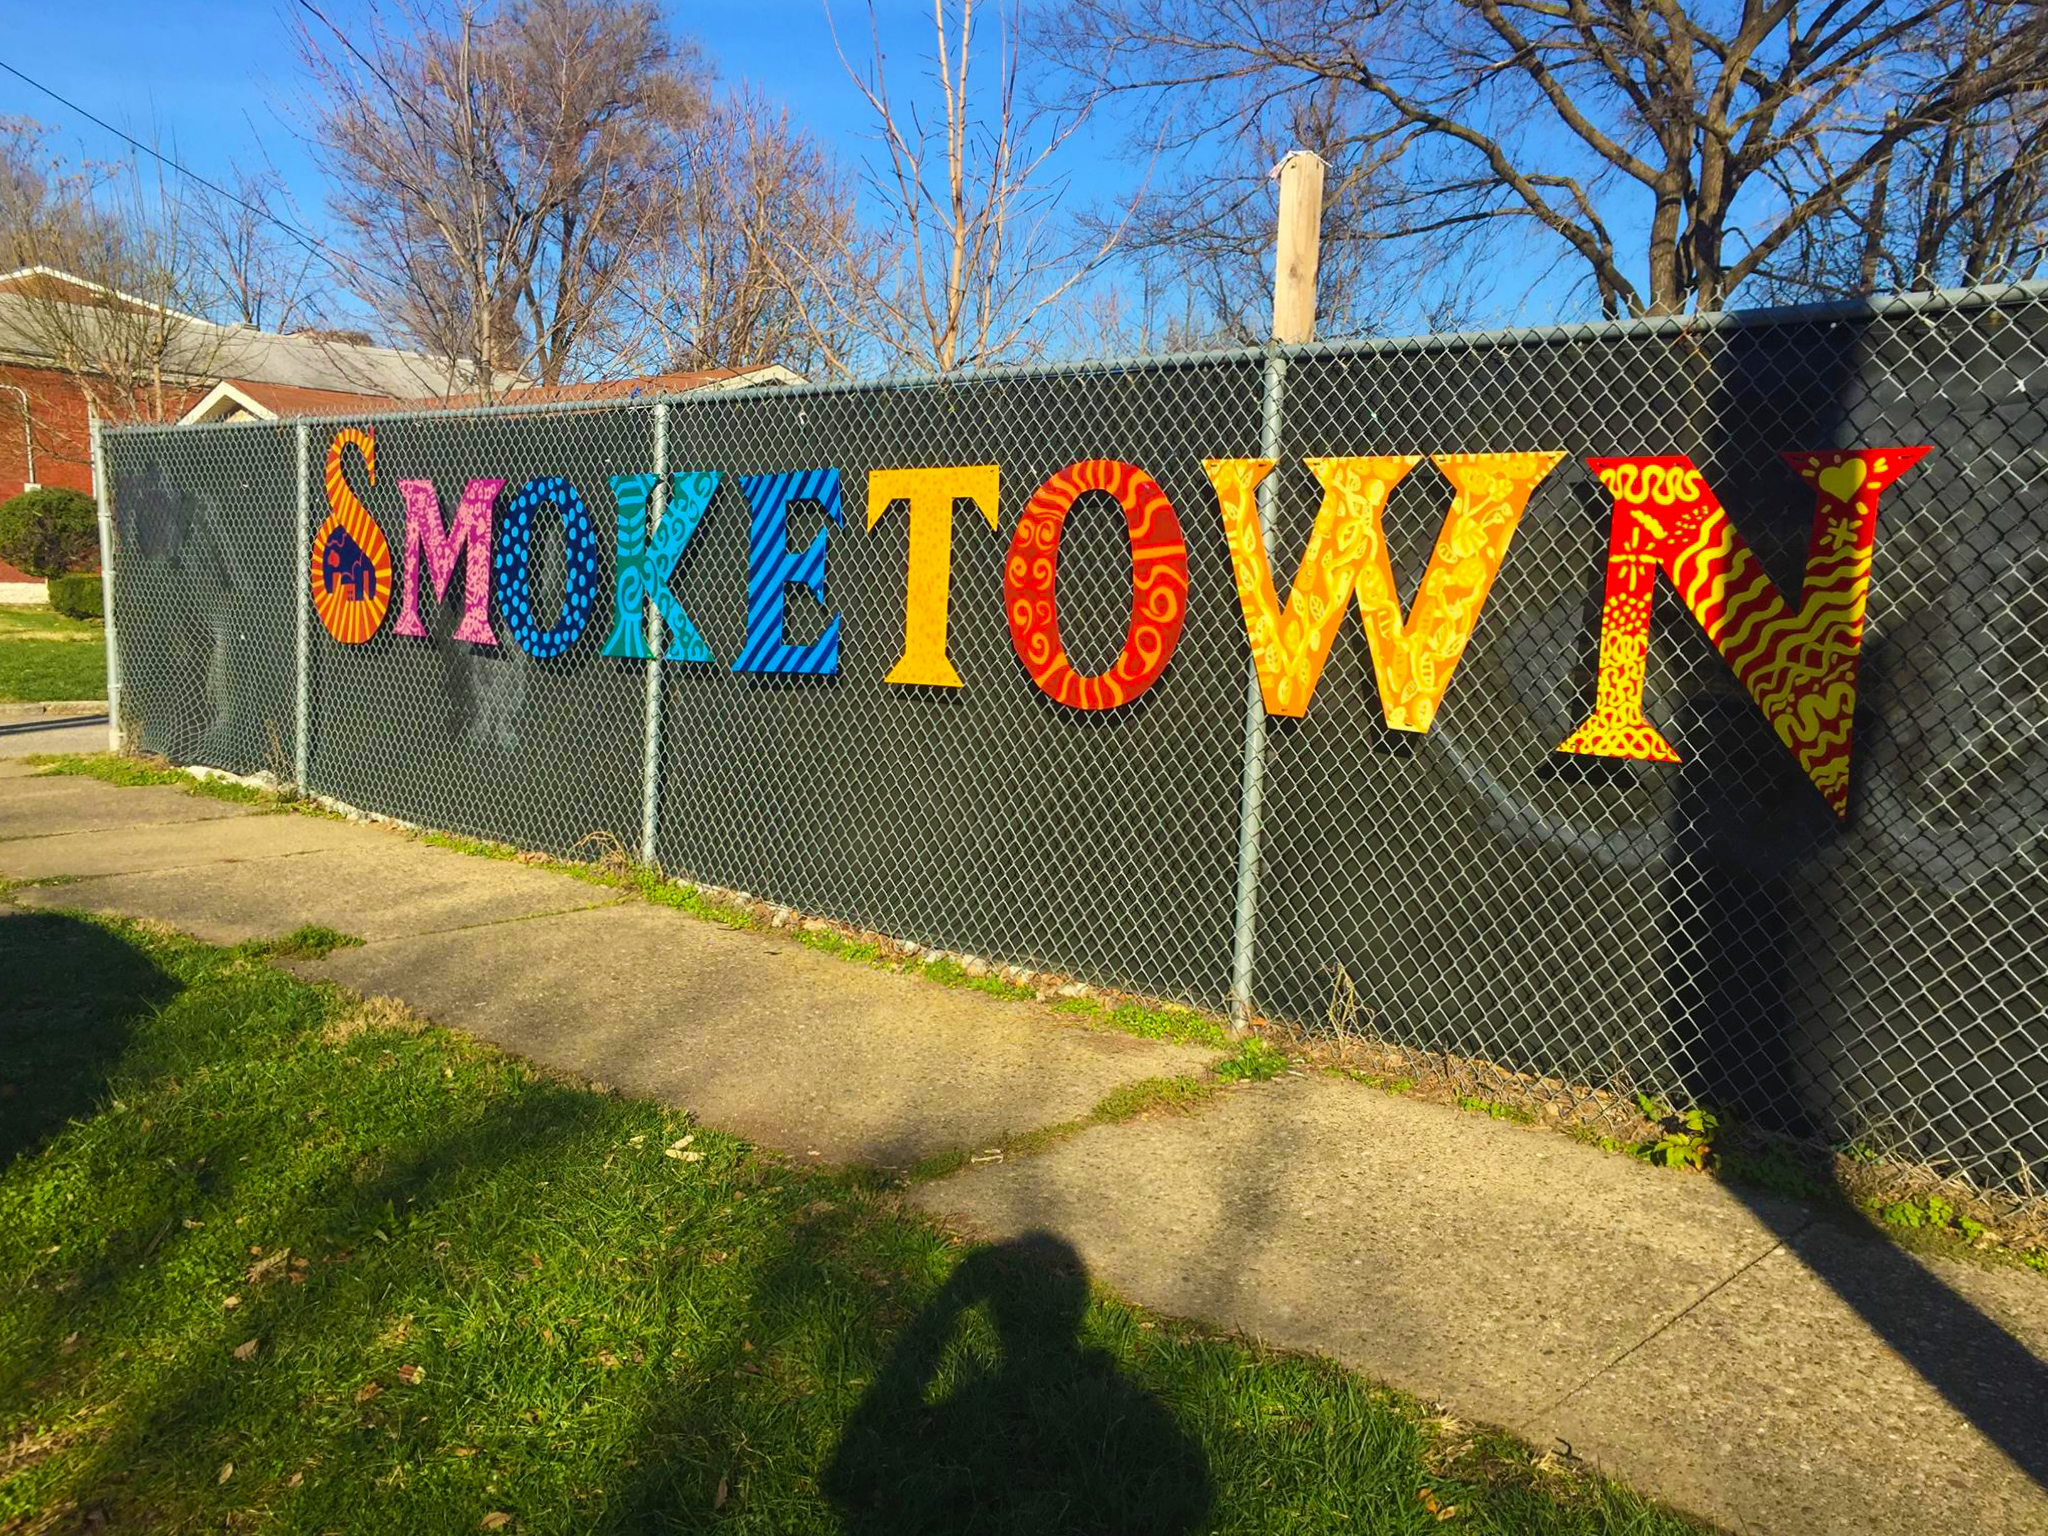 Smoketown sign on fence